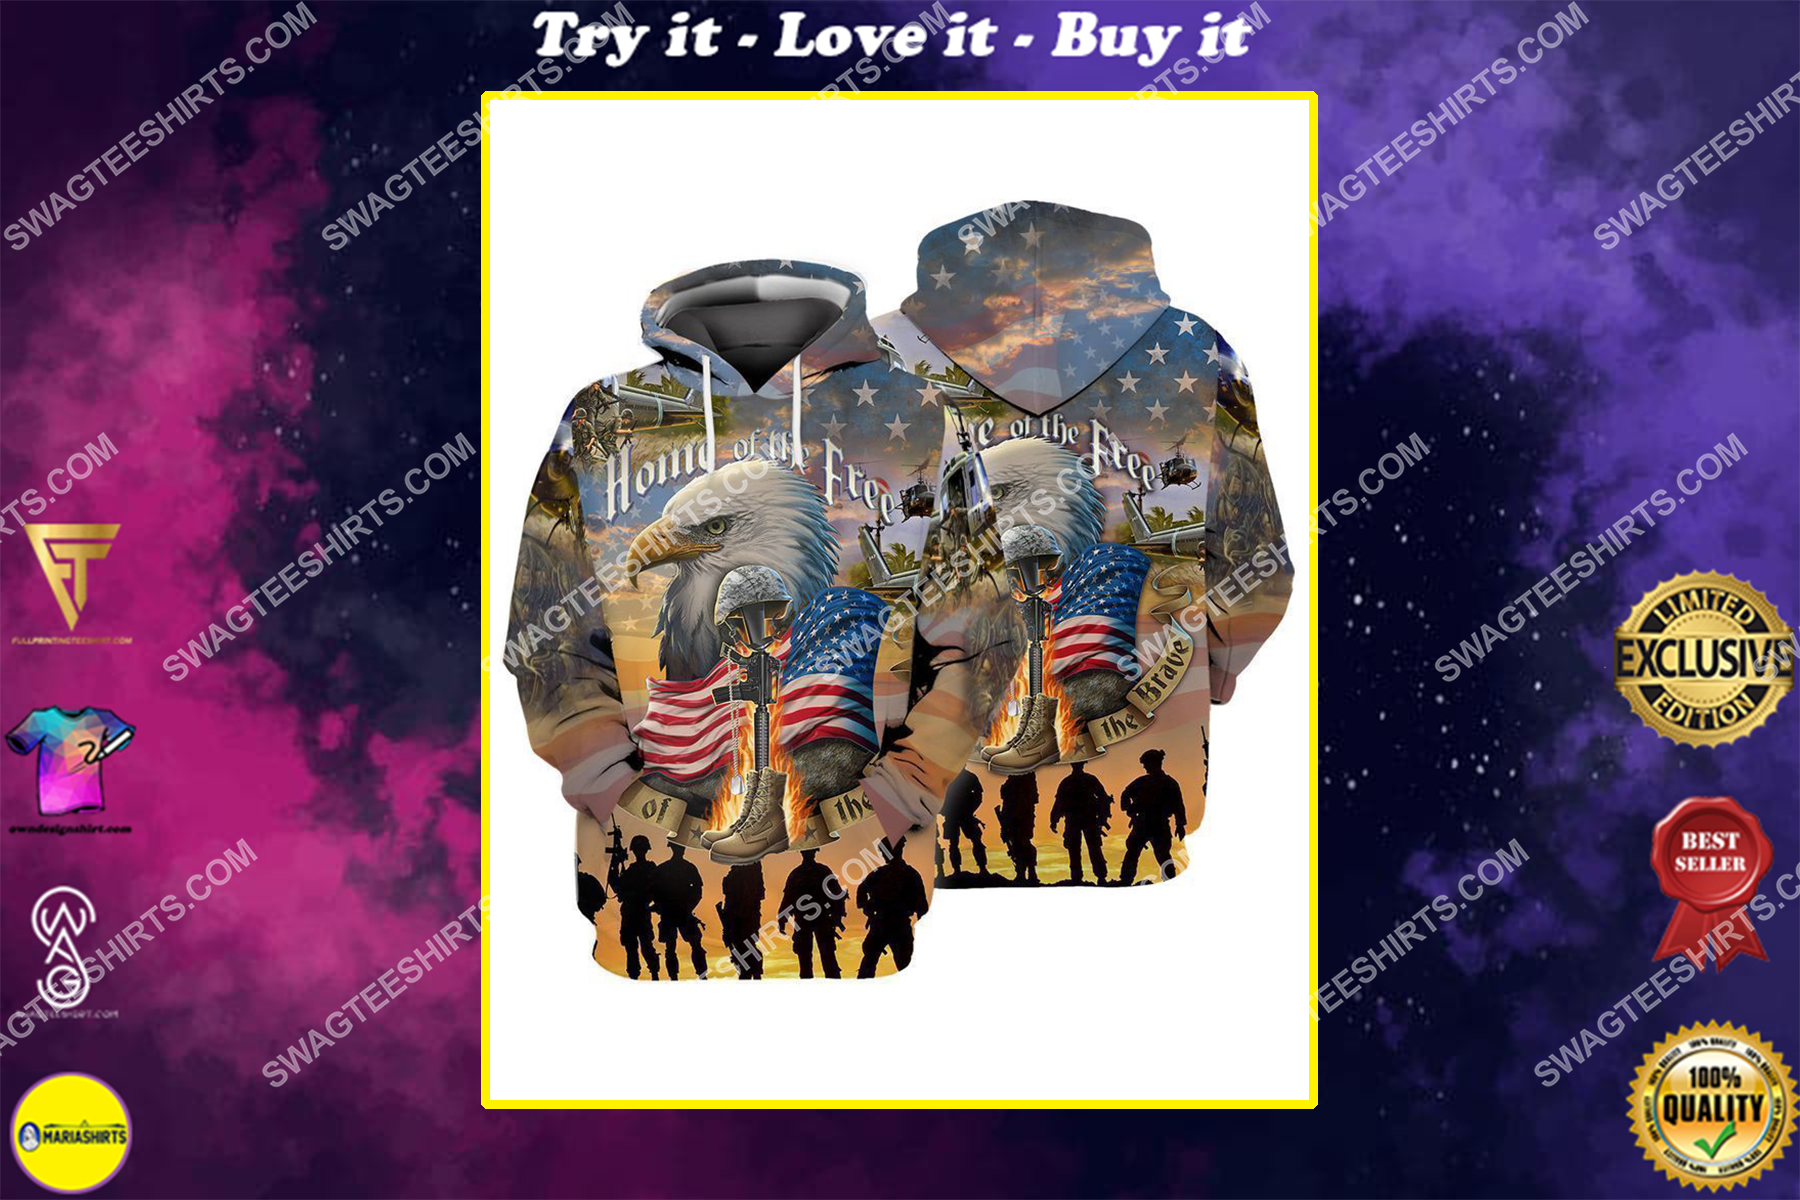 home of the free because of the brave full print shirt